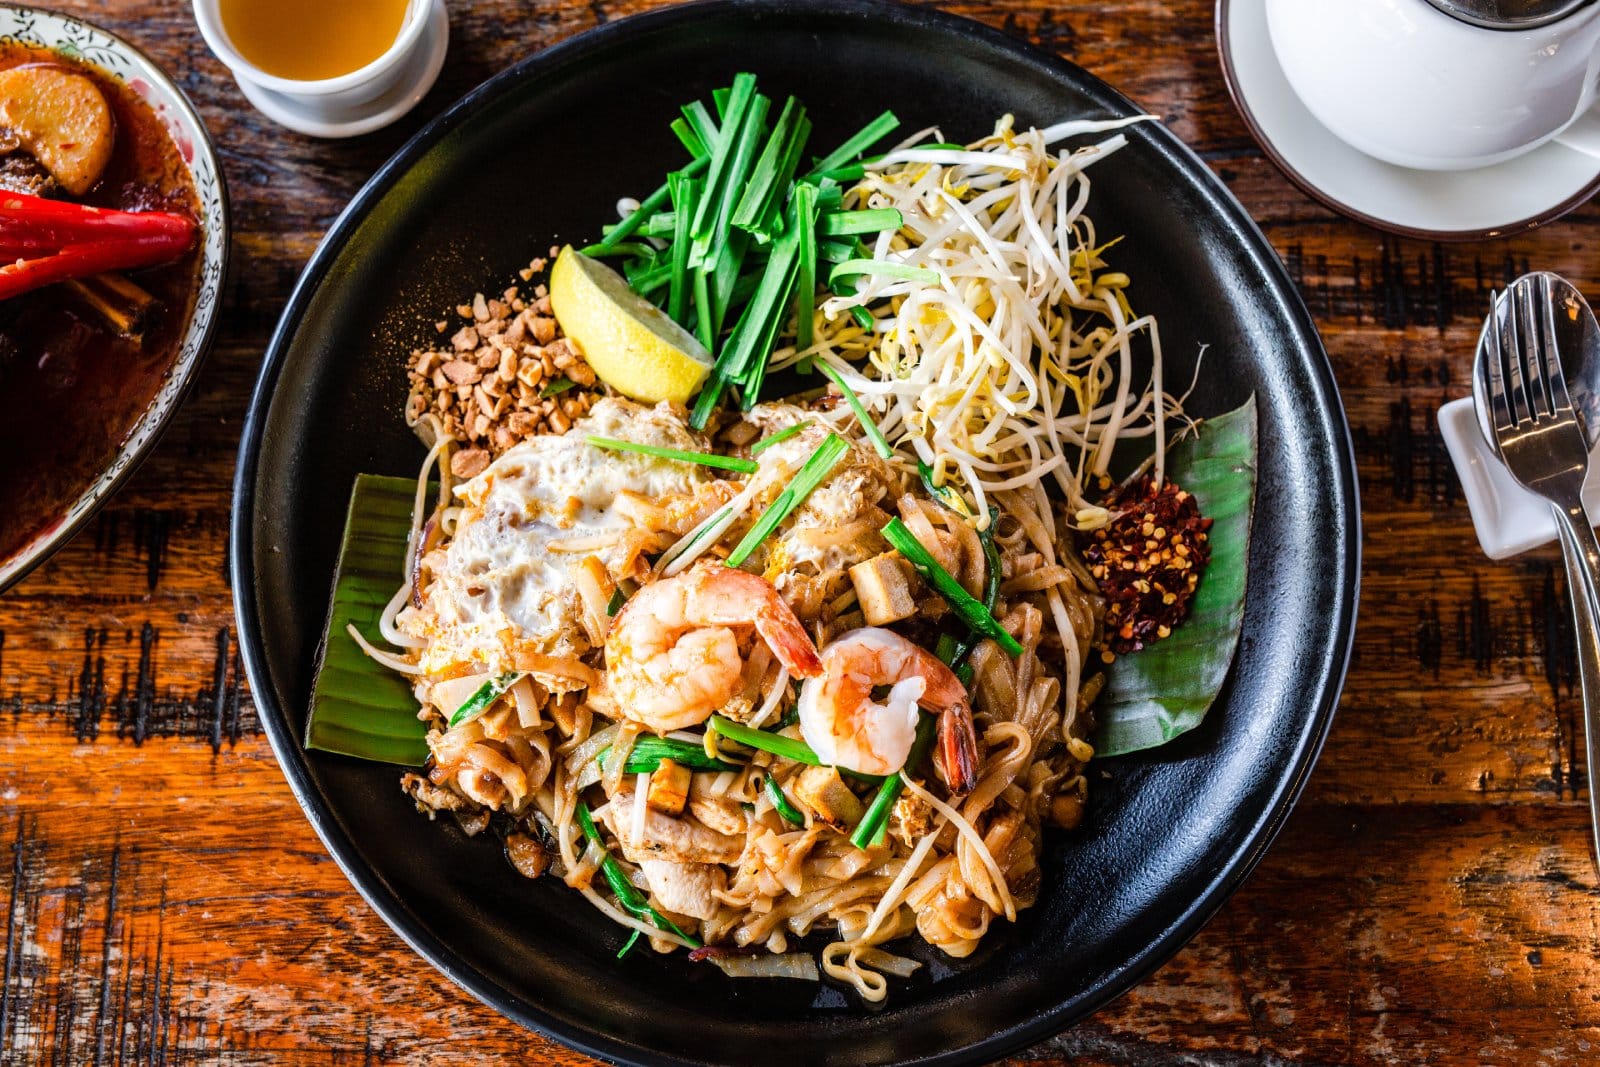 Image Credit: Shutterstock / Giulia M <p><span>This stir-fried noodle dish, with its perfect balance of sweet, sour, and salty, topped with peanuts and lime, is Thailand in a bite.</span></p>